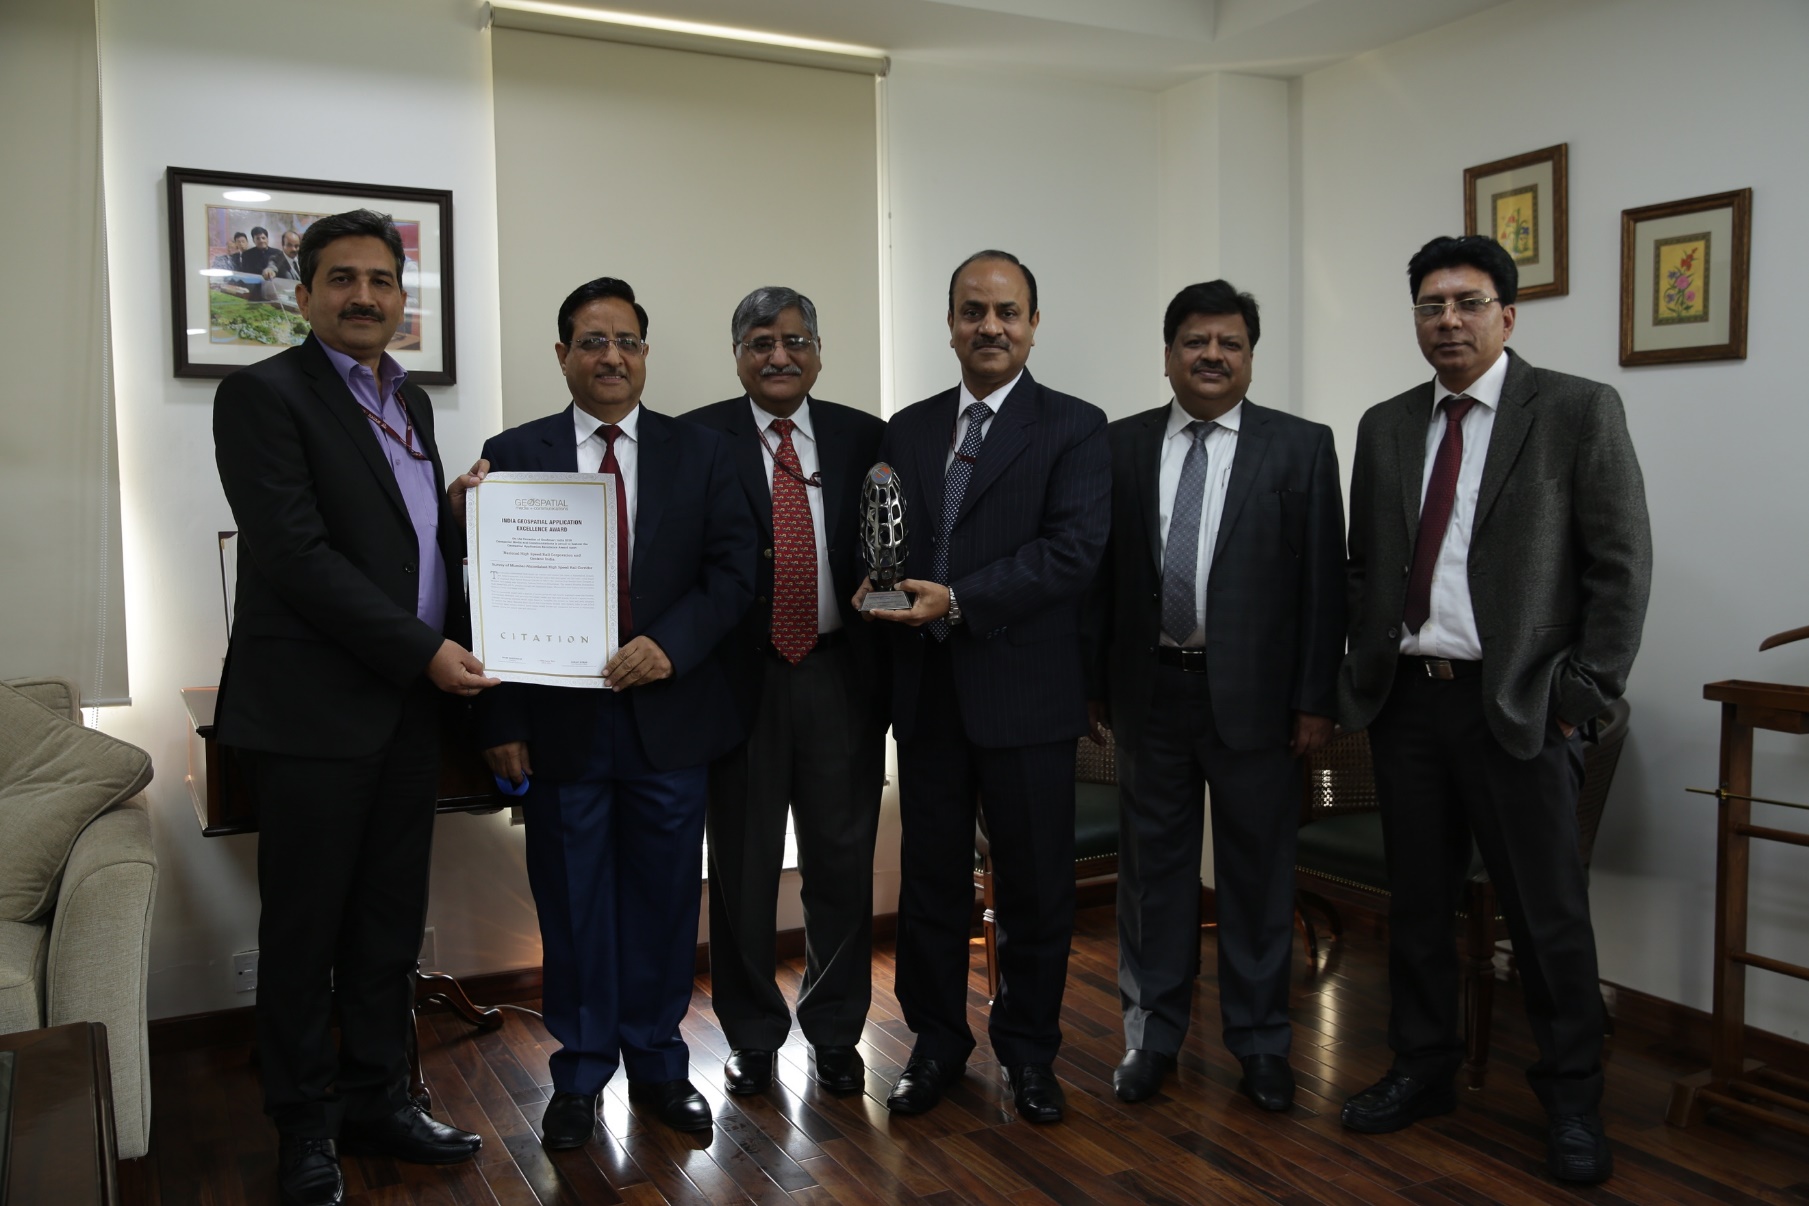 Geospatial Excellence Award